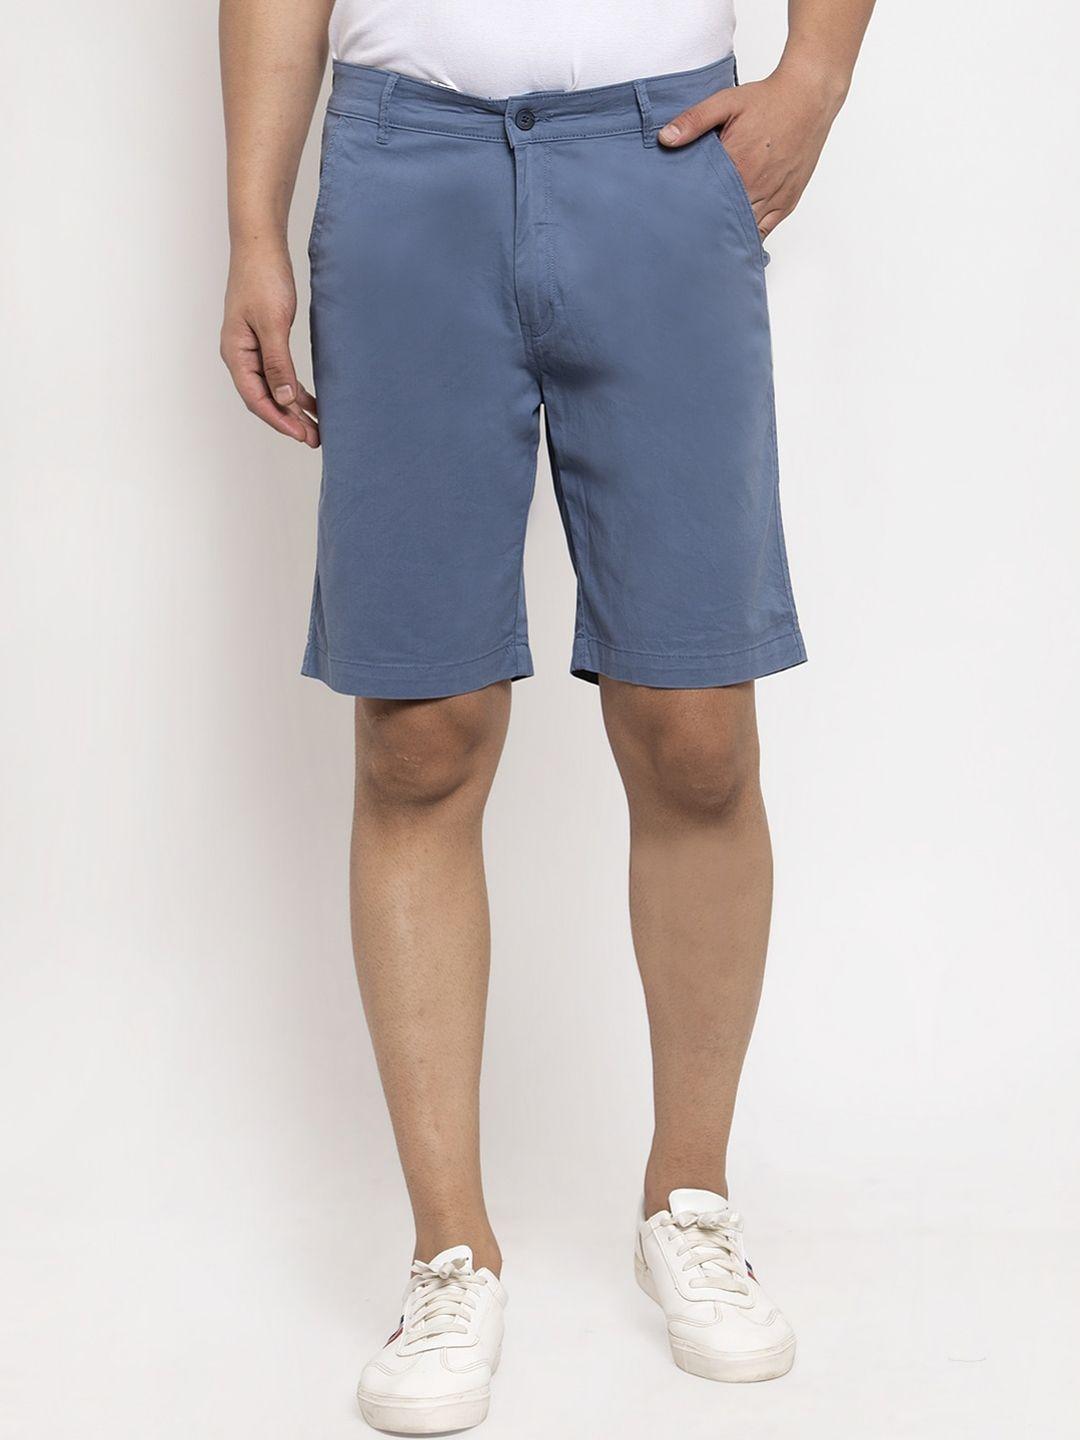 cantabil-men-blue-solid-mid-rise-chinos-shorts